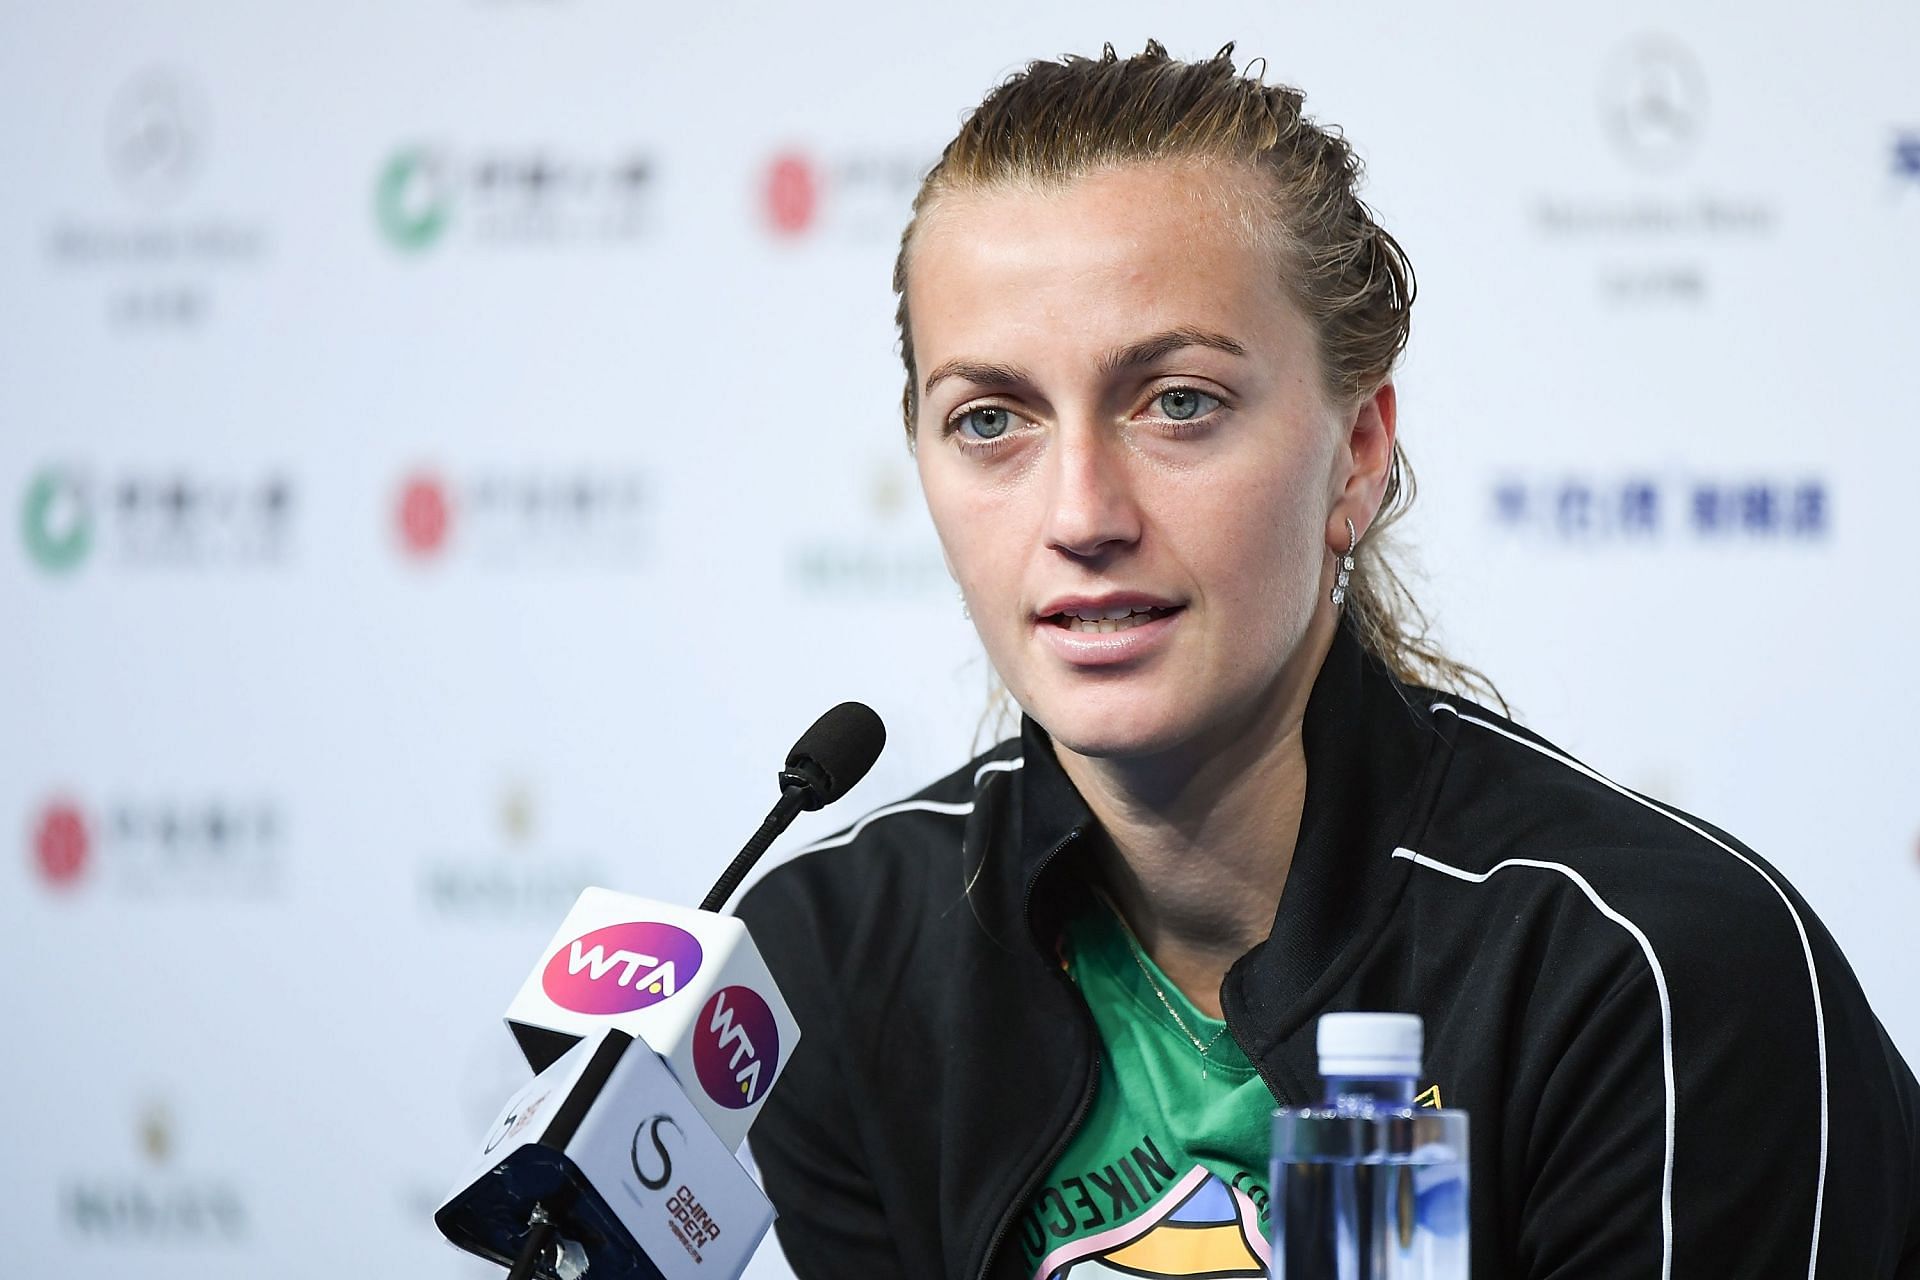 Petra Kvitova is one of the two former champions in the draw.